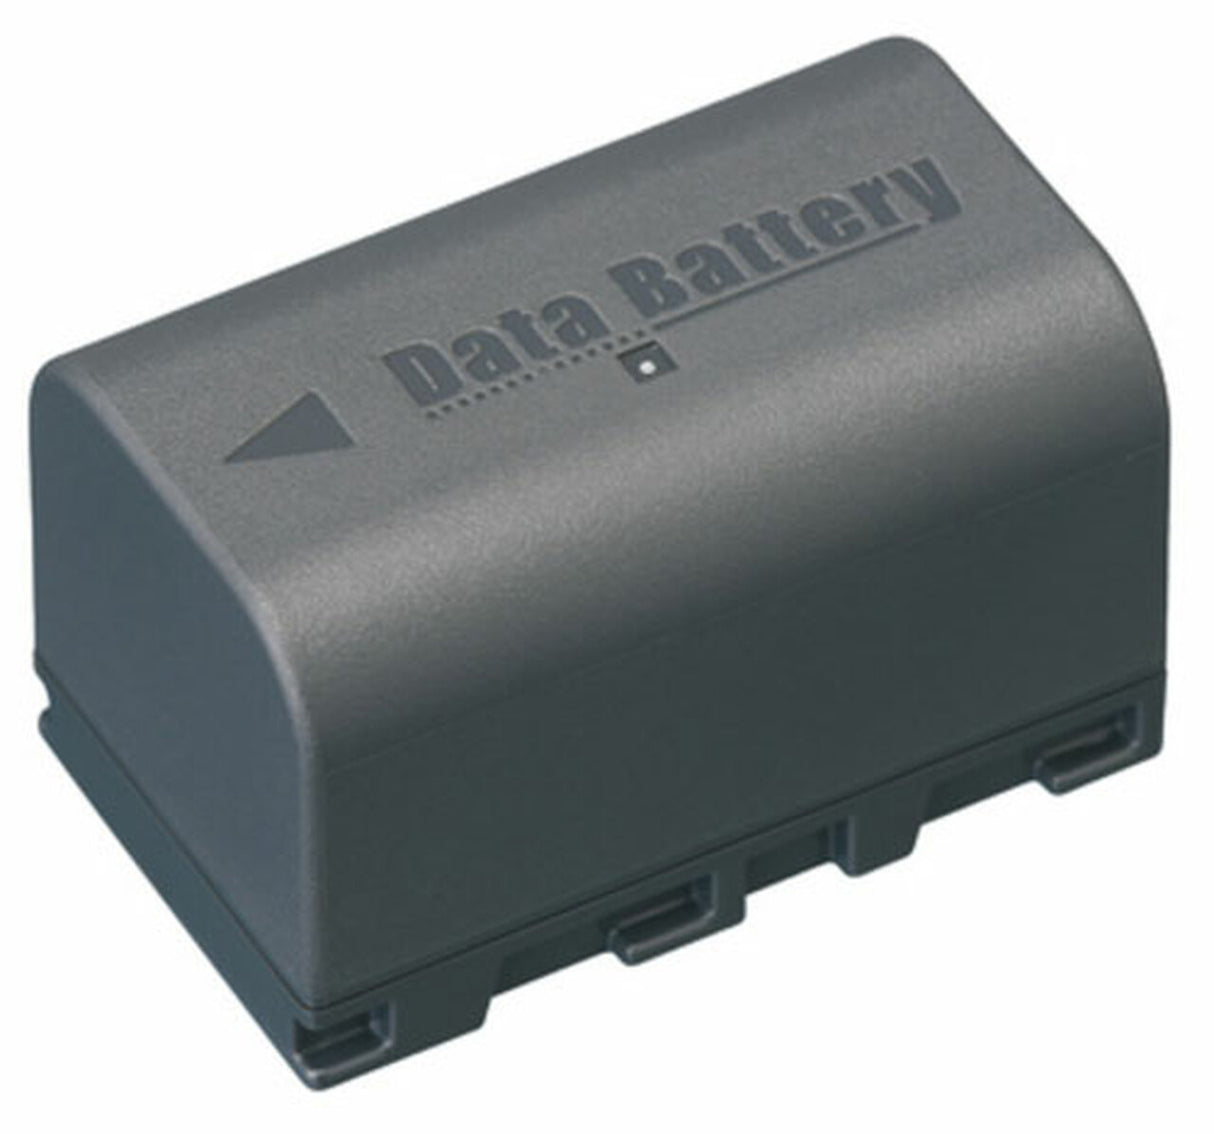 Battery For JVC GZ-MS130 Handycam Camcorders